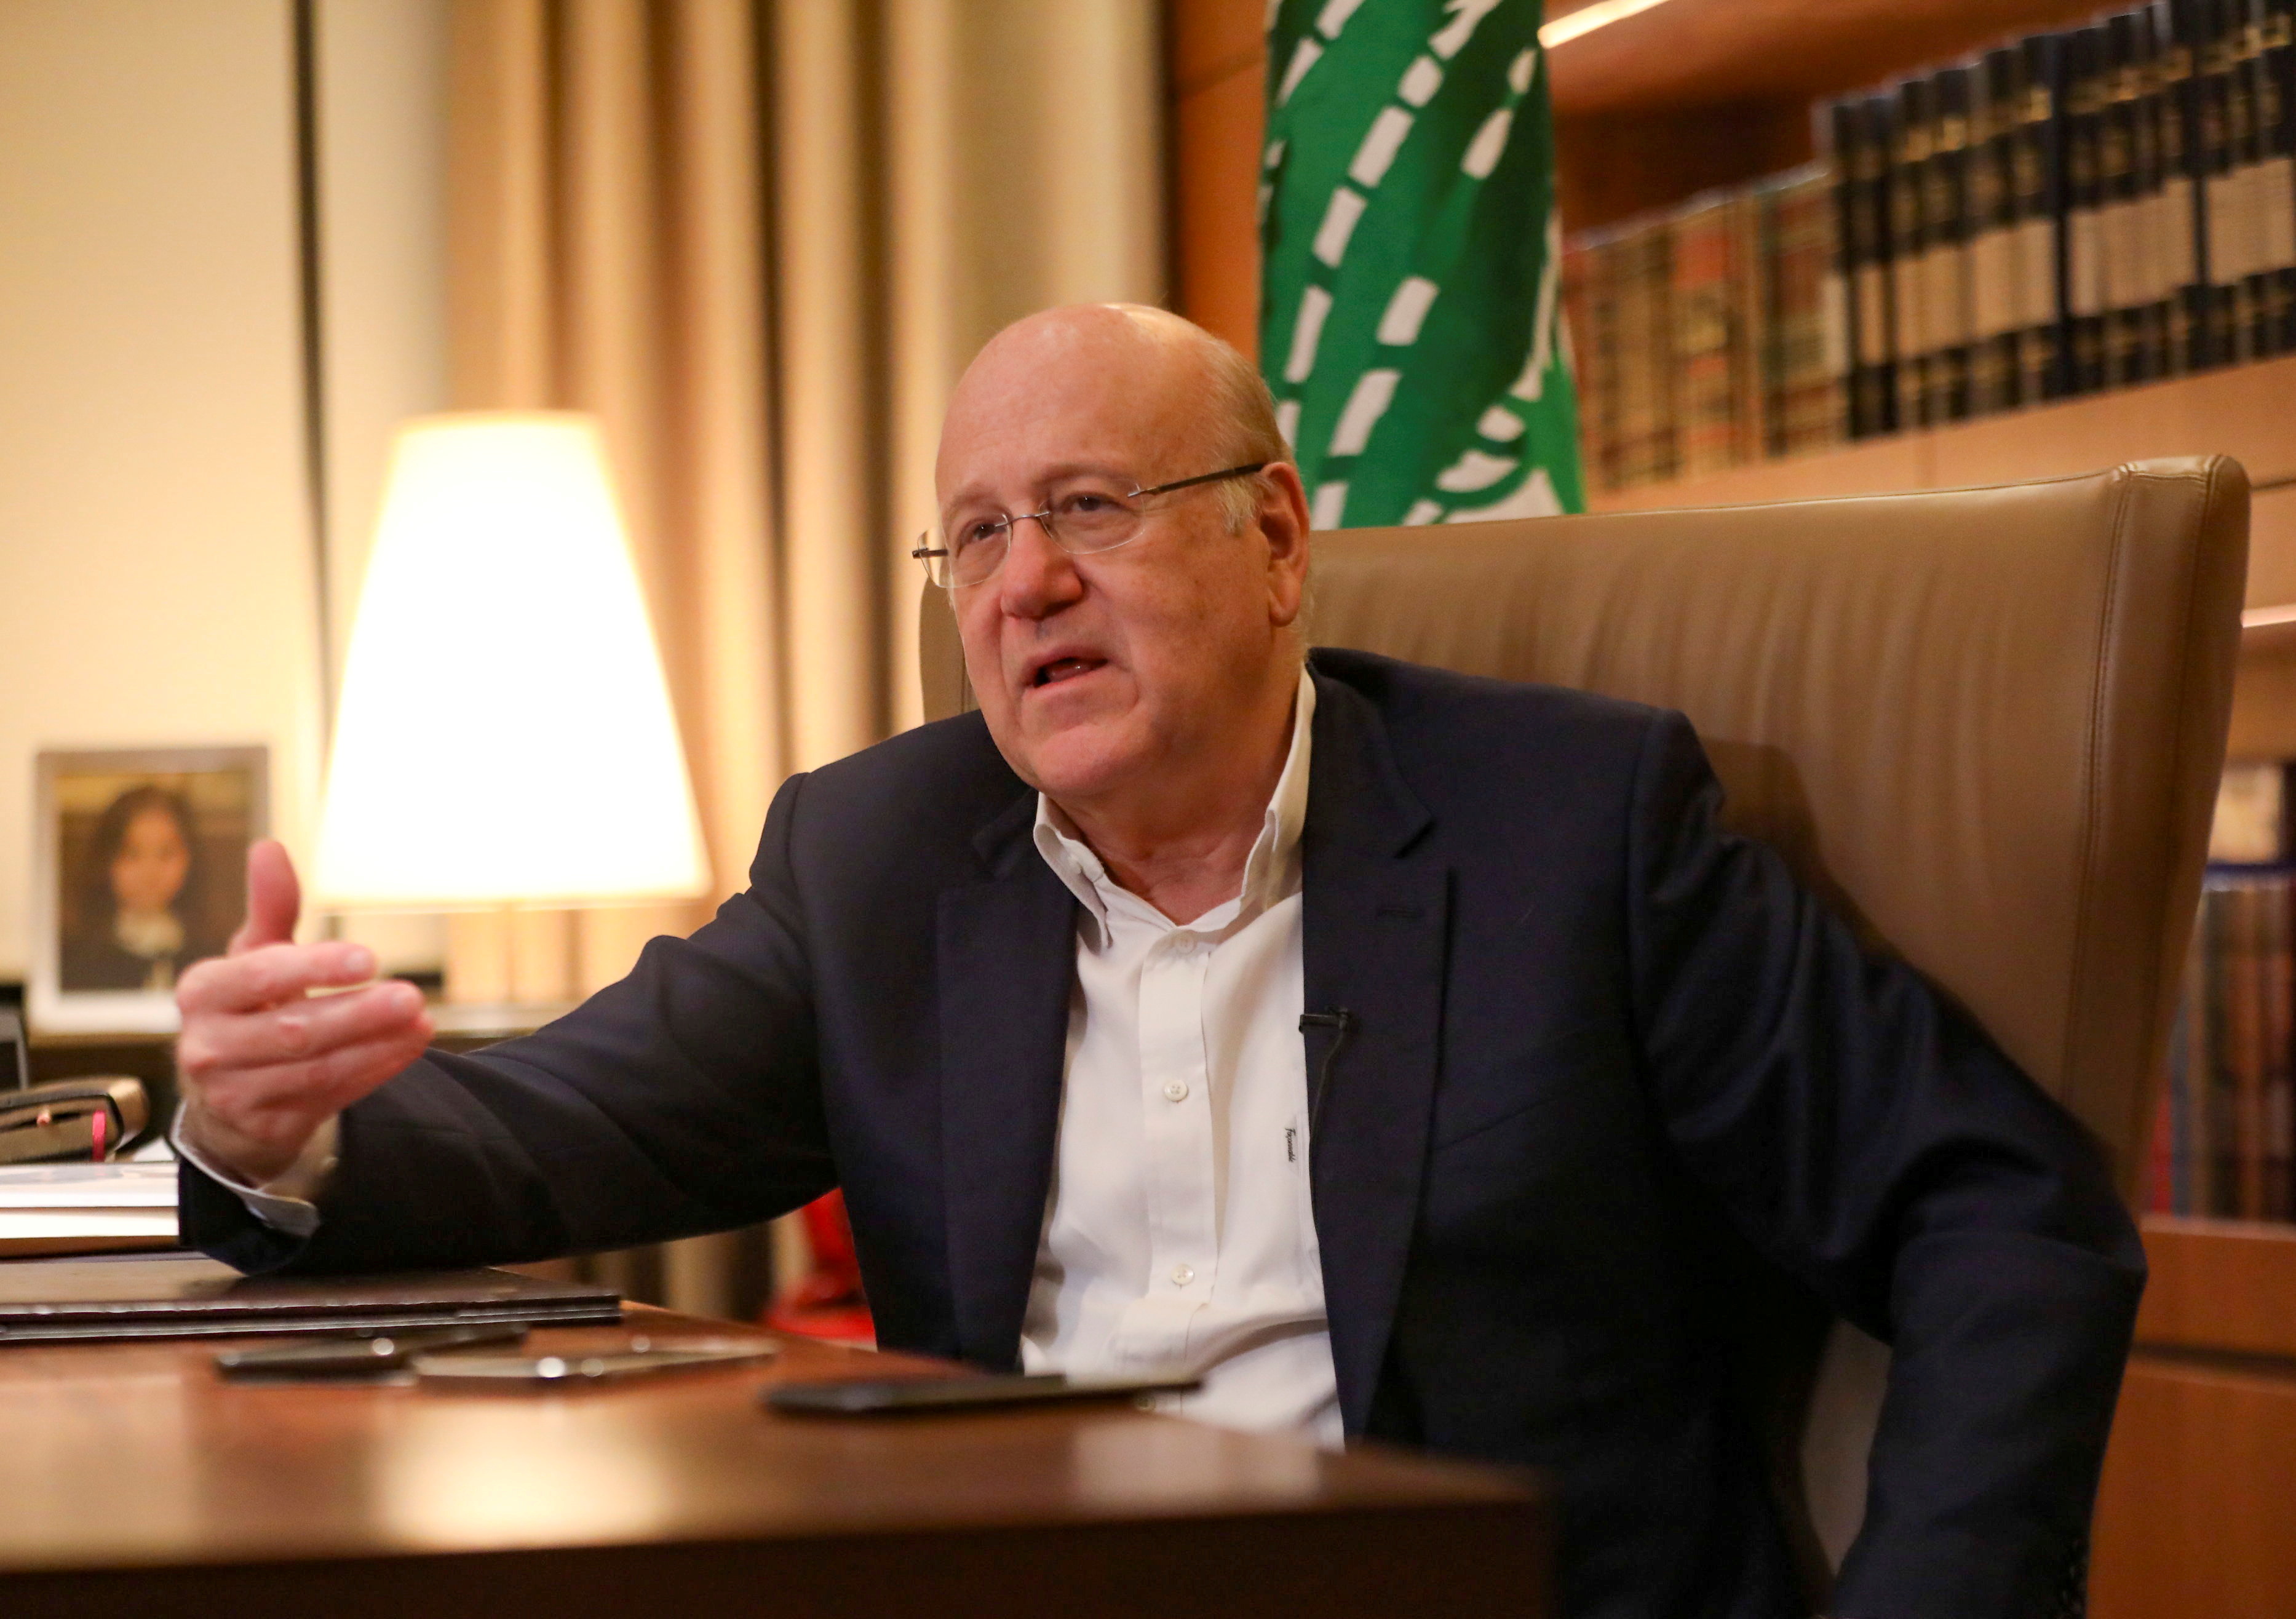 Lebanese Prime Minister Najib Mikati speaks during an interview with Reuters at the government palace in Beirut